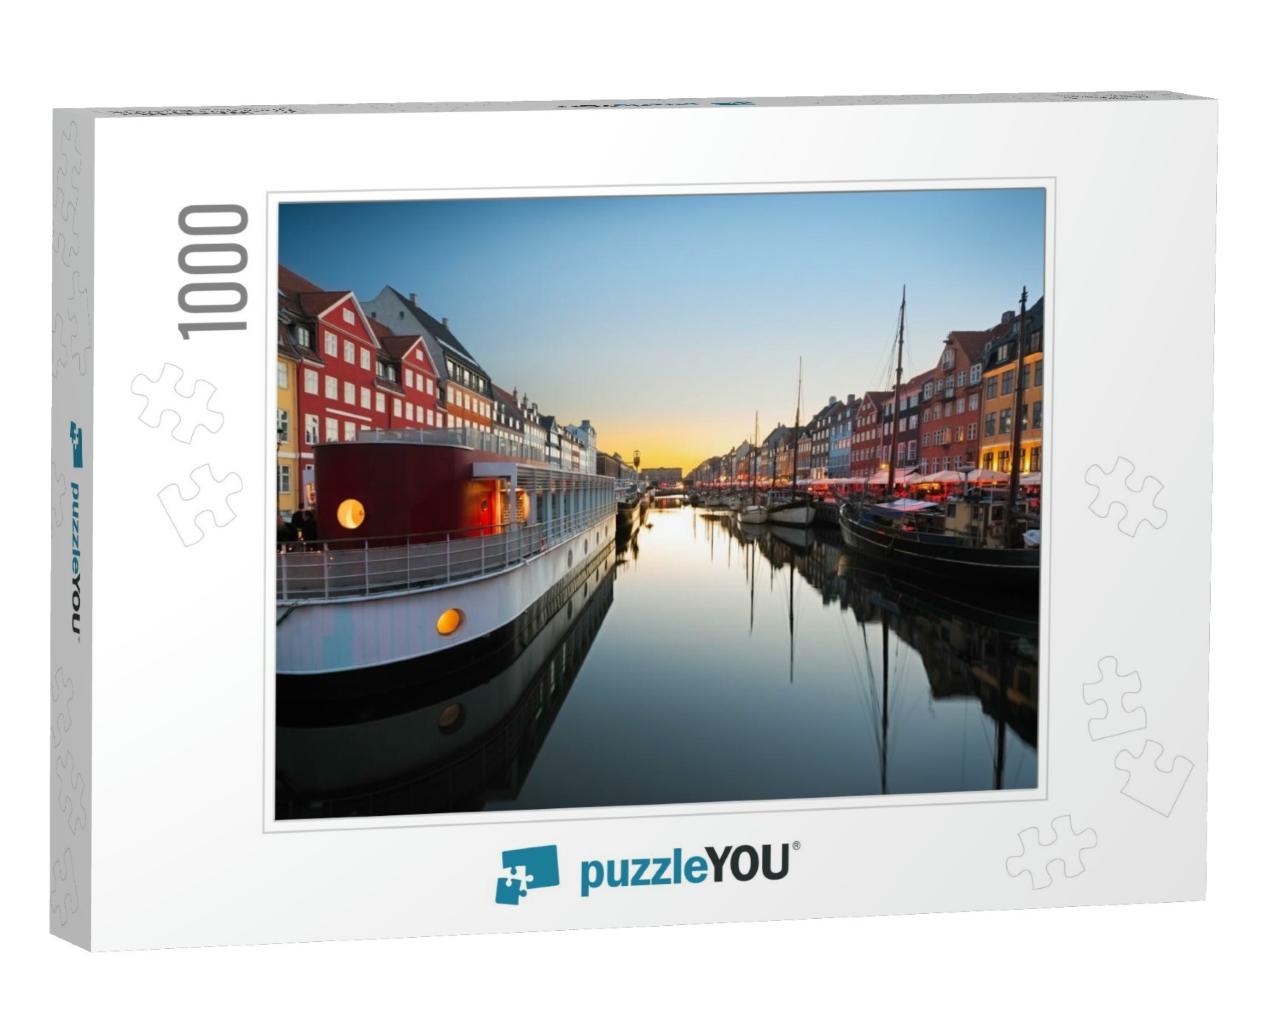 Ships in Nyhavn At Sunset, Copenhagen, Denmark... Jigsaw Puzzle with 1000 pieces